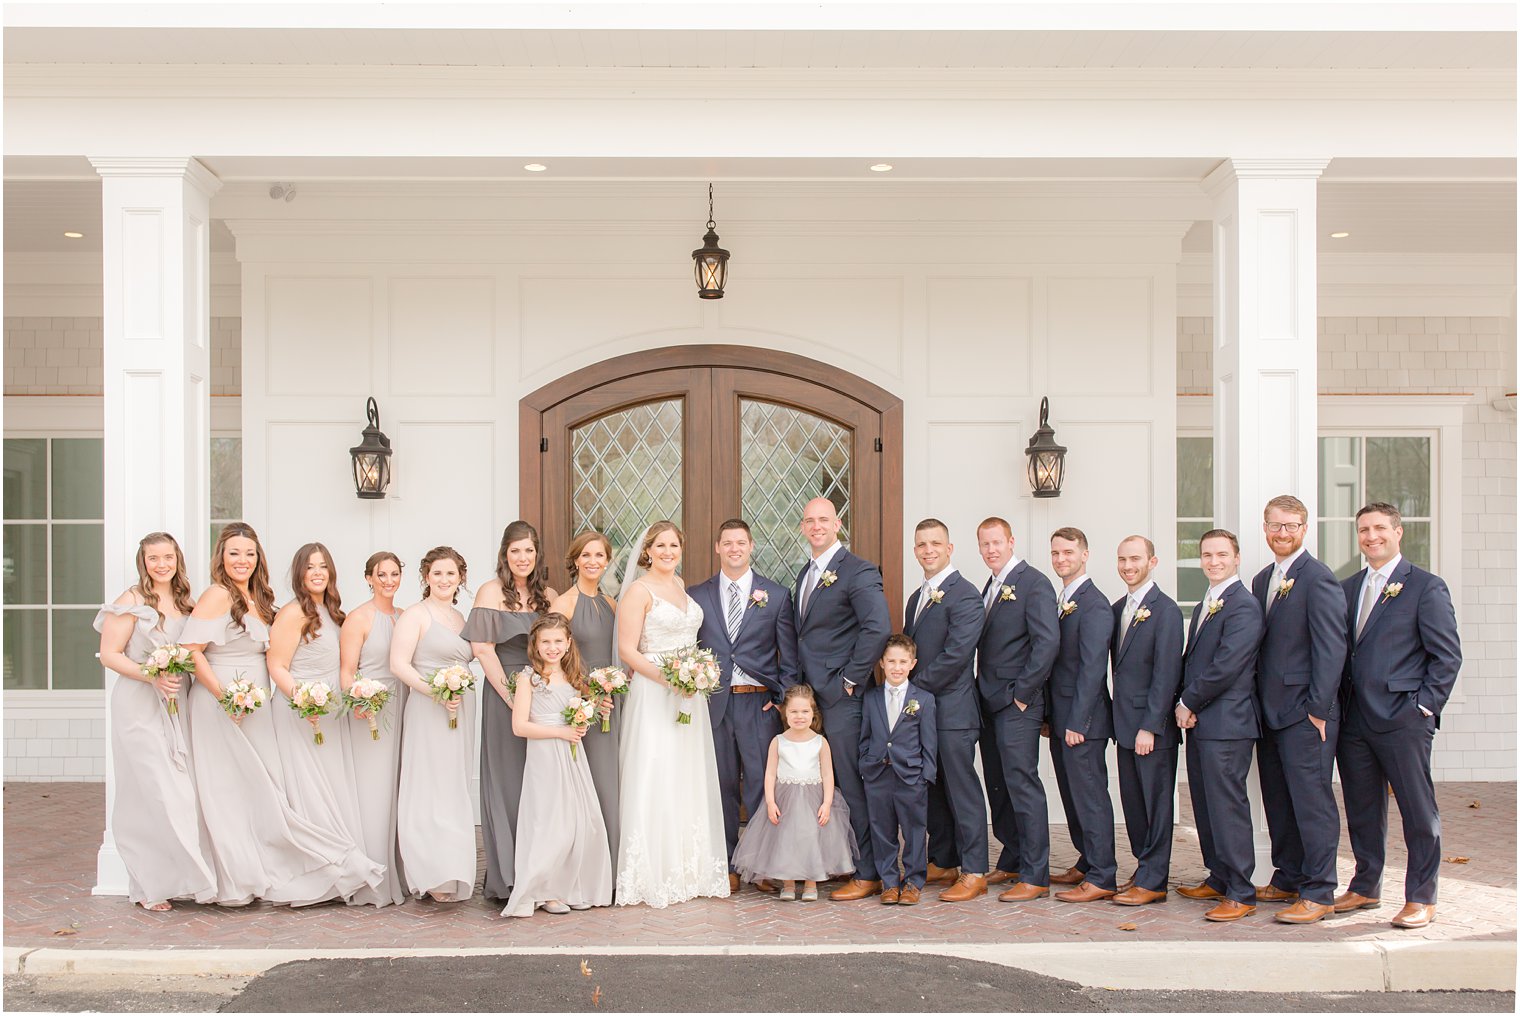 Bridal Party photo at The Mill Lakeside Manor